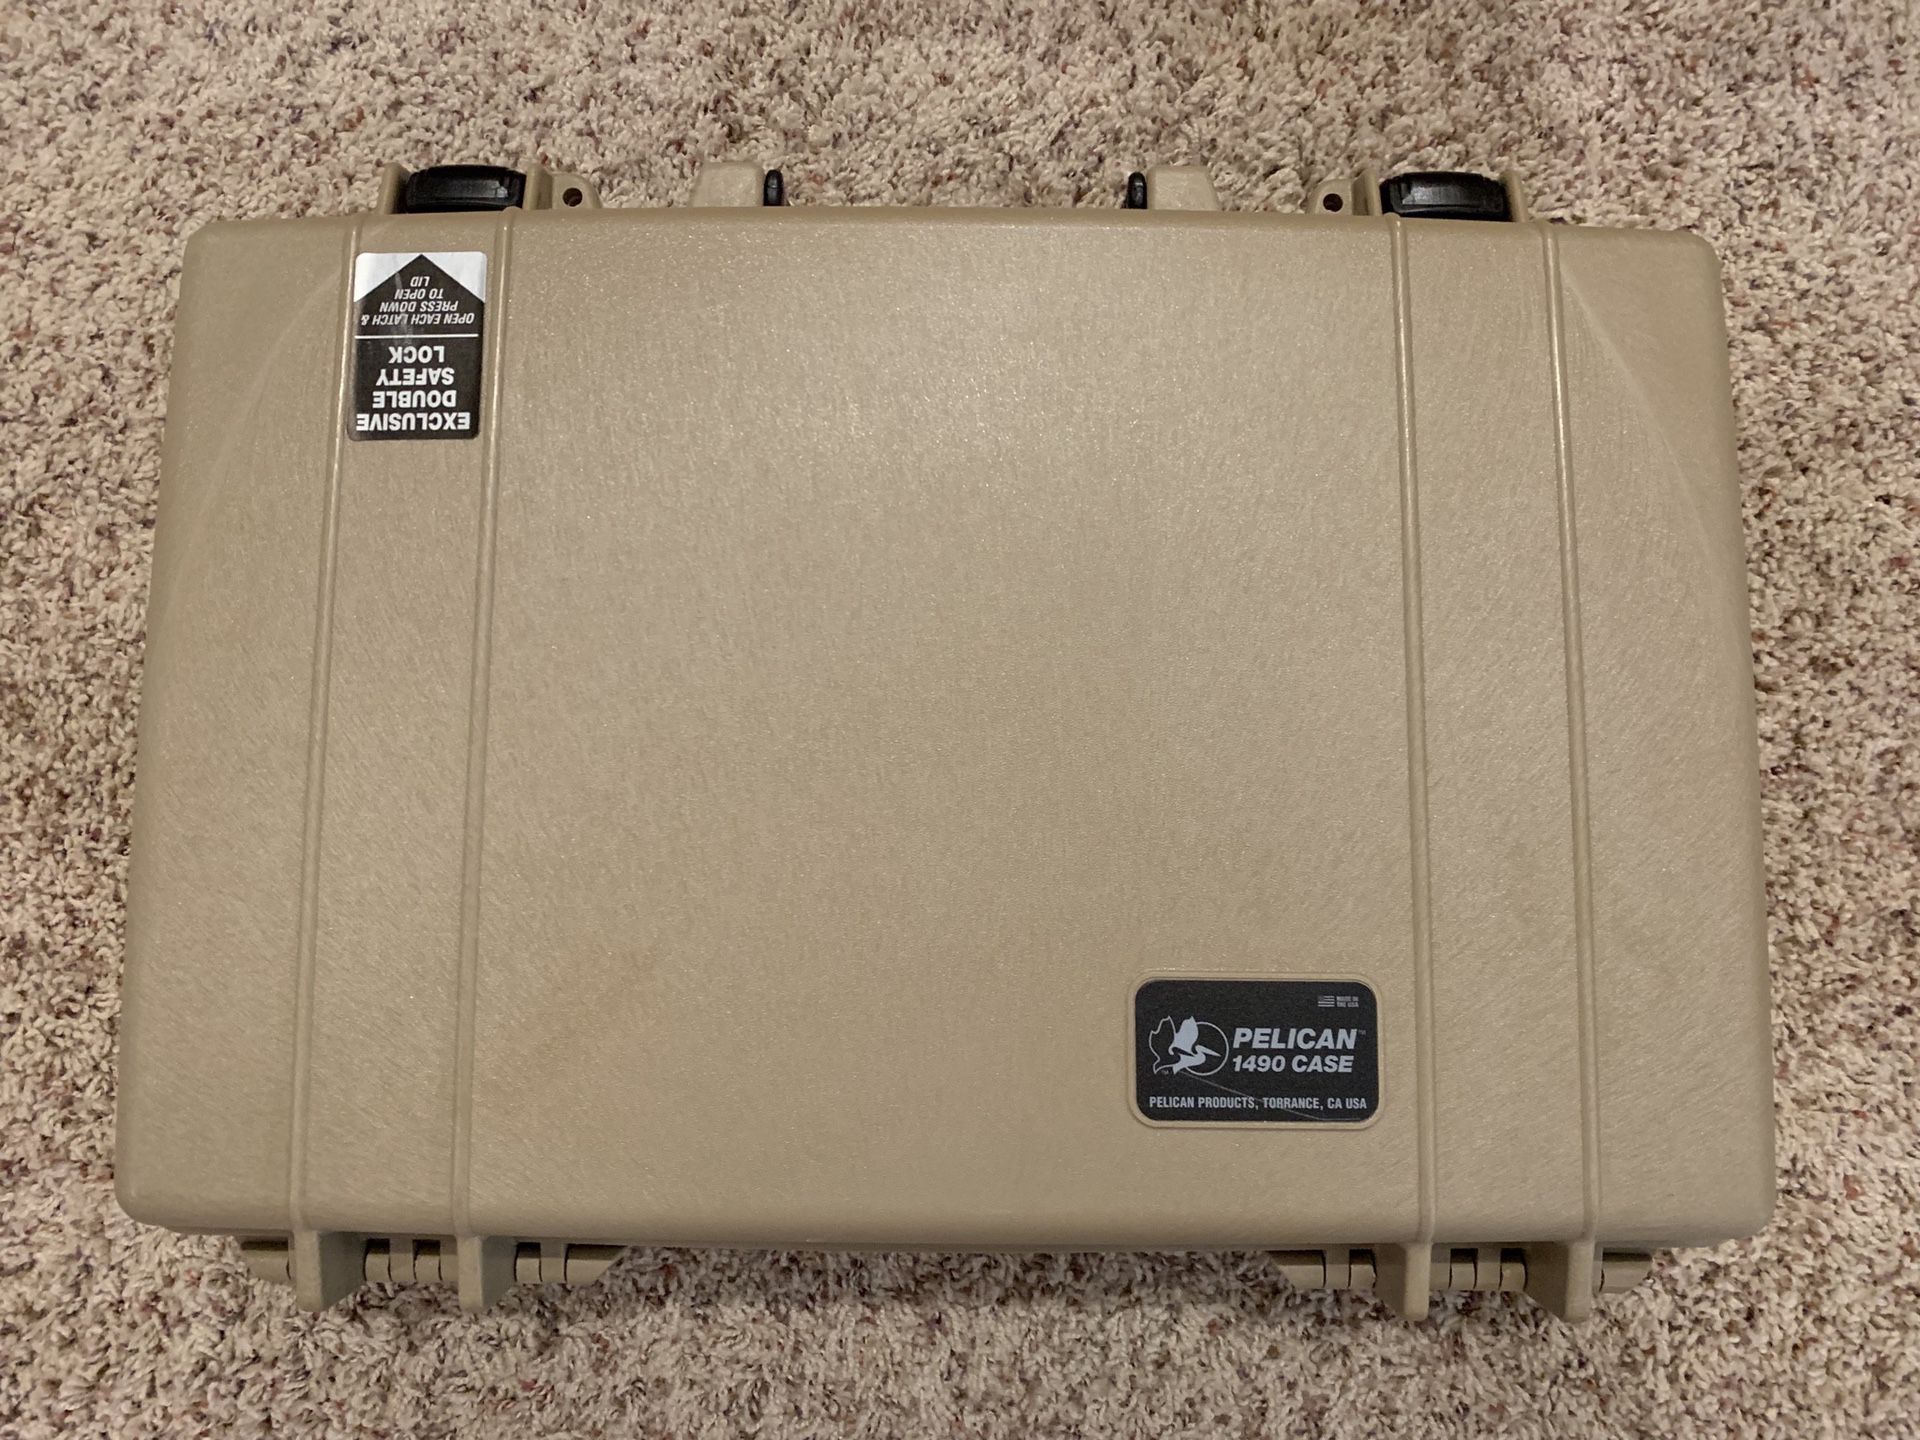 Pelican 1490 case with laptop sleeve and protective foam